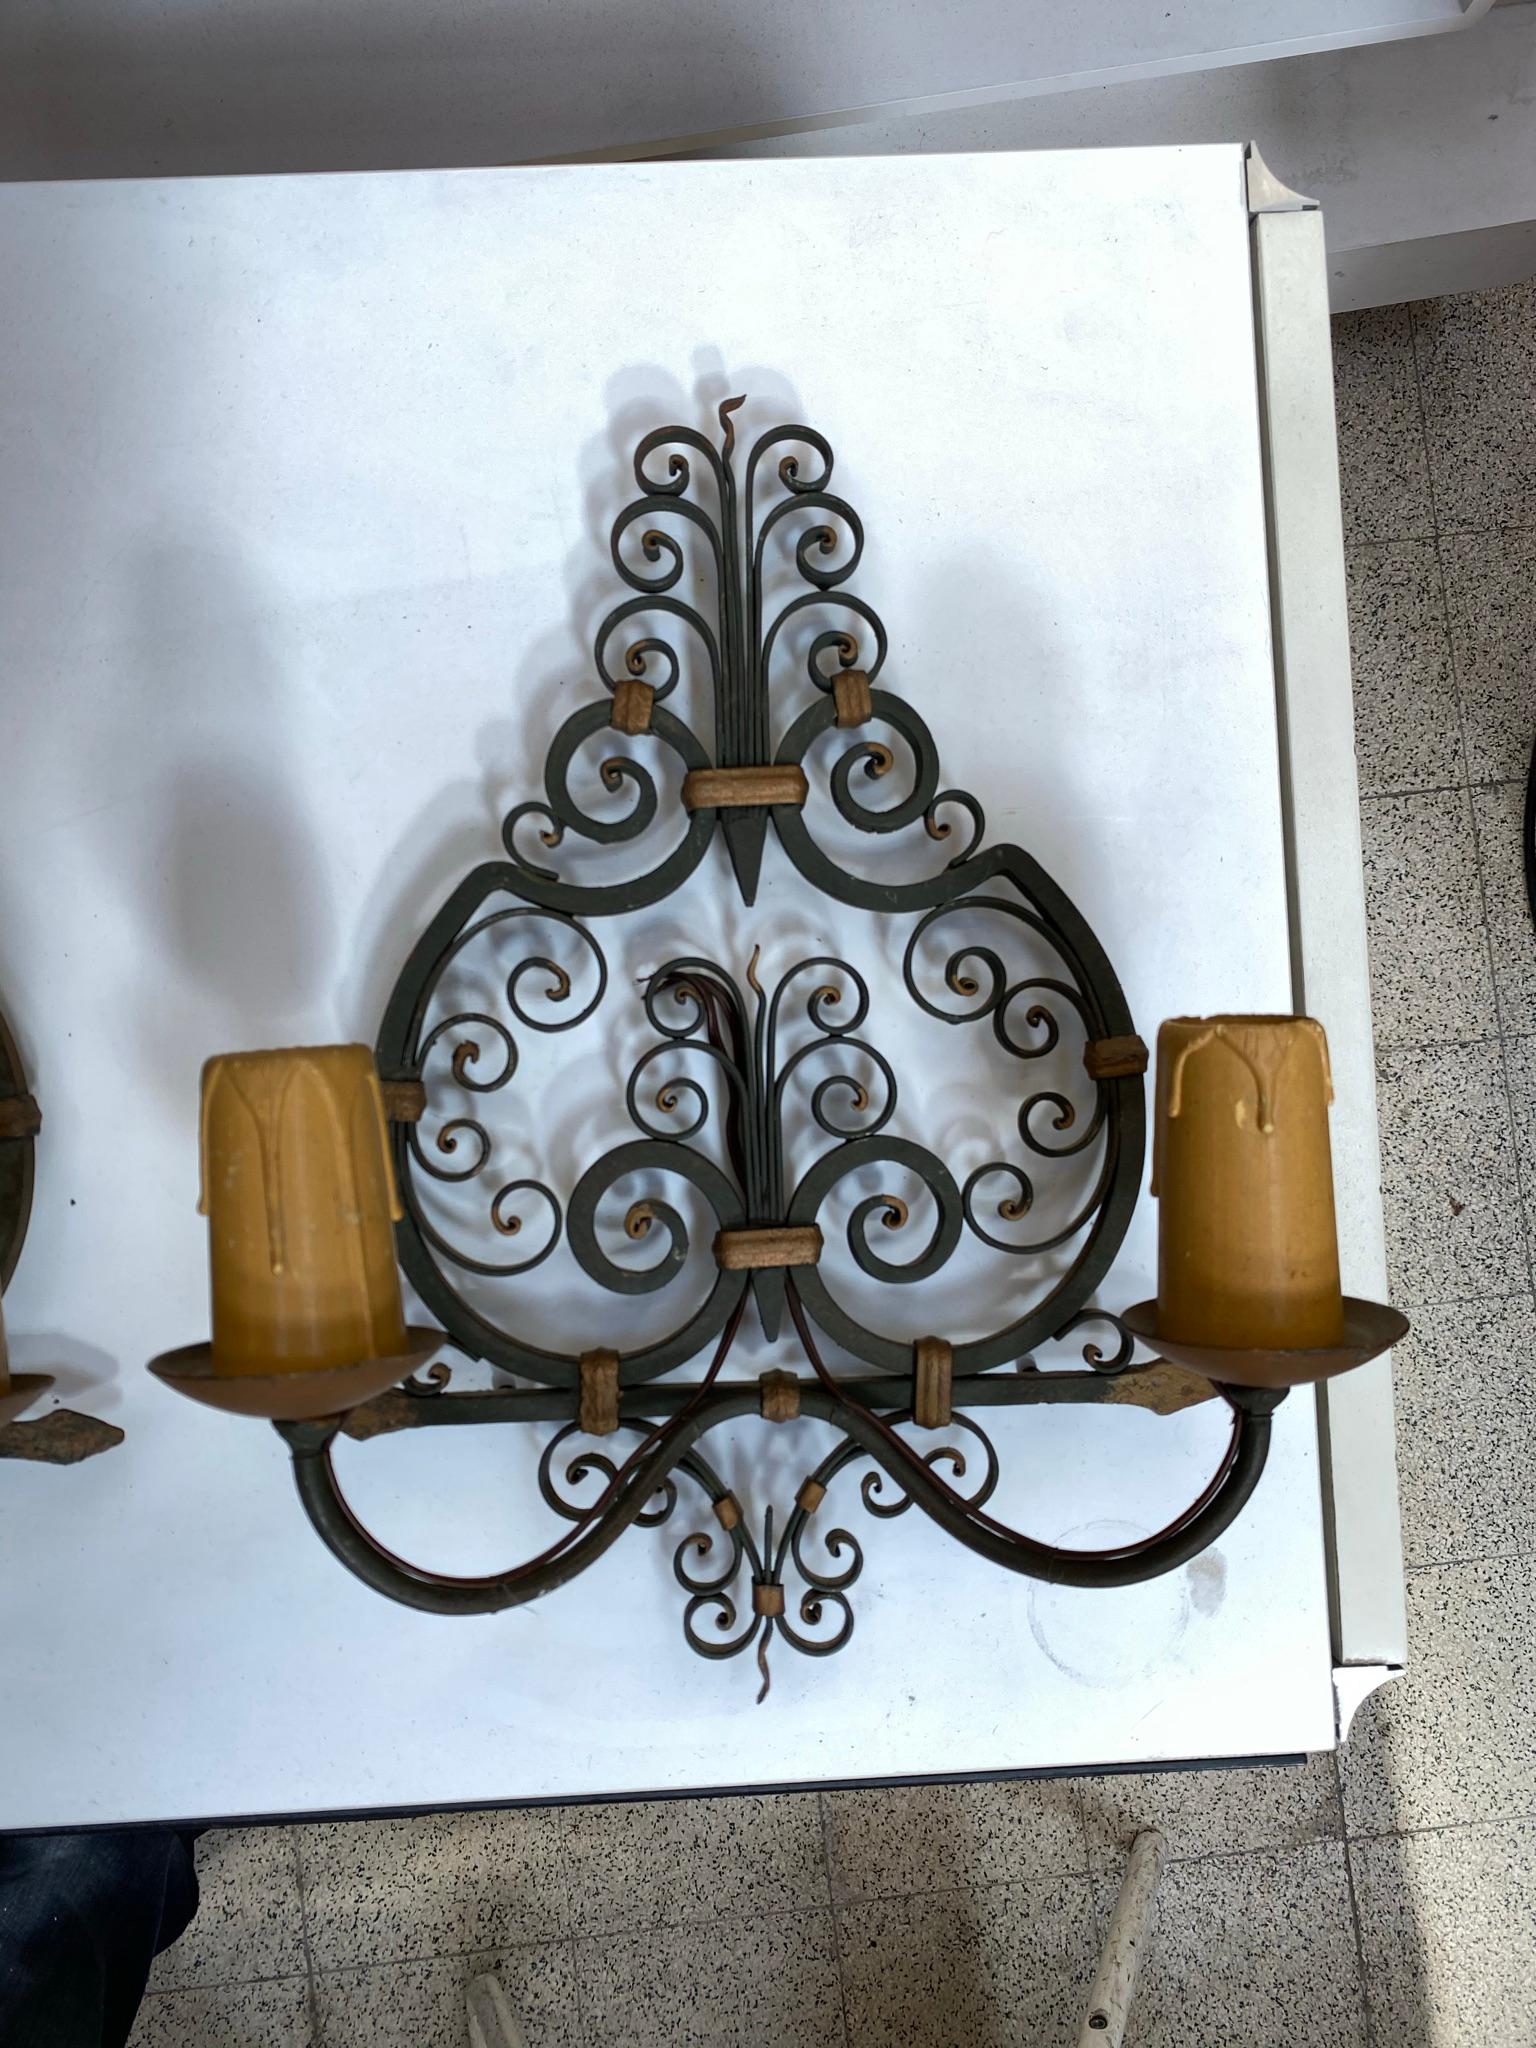 3 Wrought Iron, Art Deco Wall Sconces, French, 1940s In Good Condition For Sale In Saint-Ouen, FR